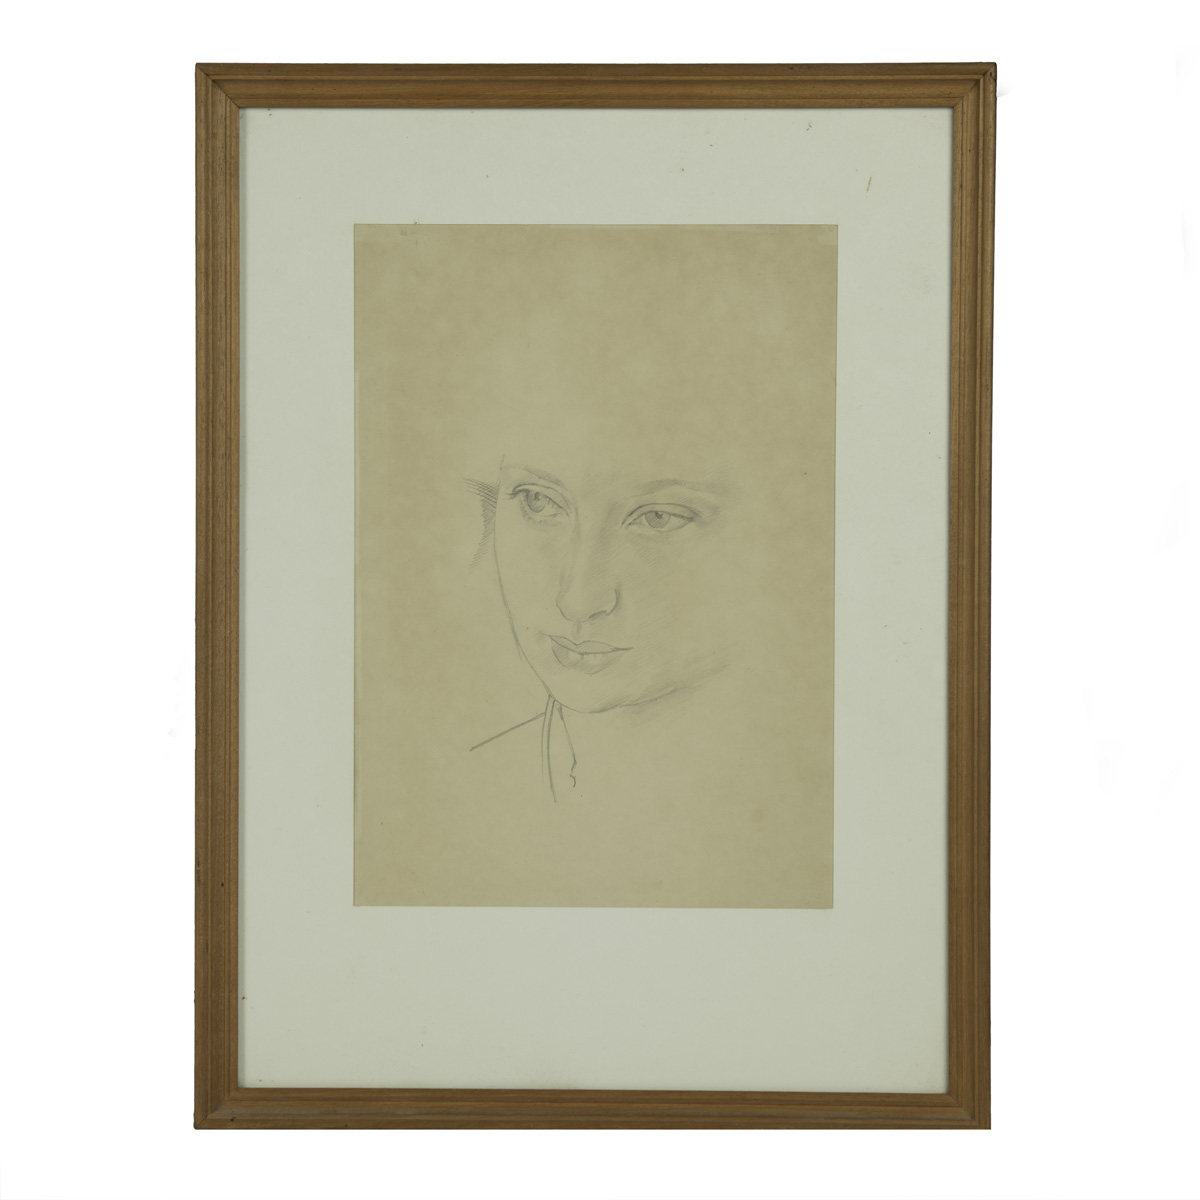 An original portrait drawing by Sir Stanley Spencer of Daphne Spencer